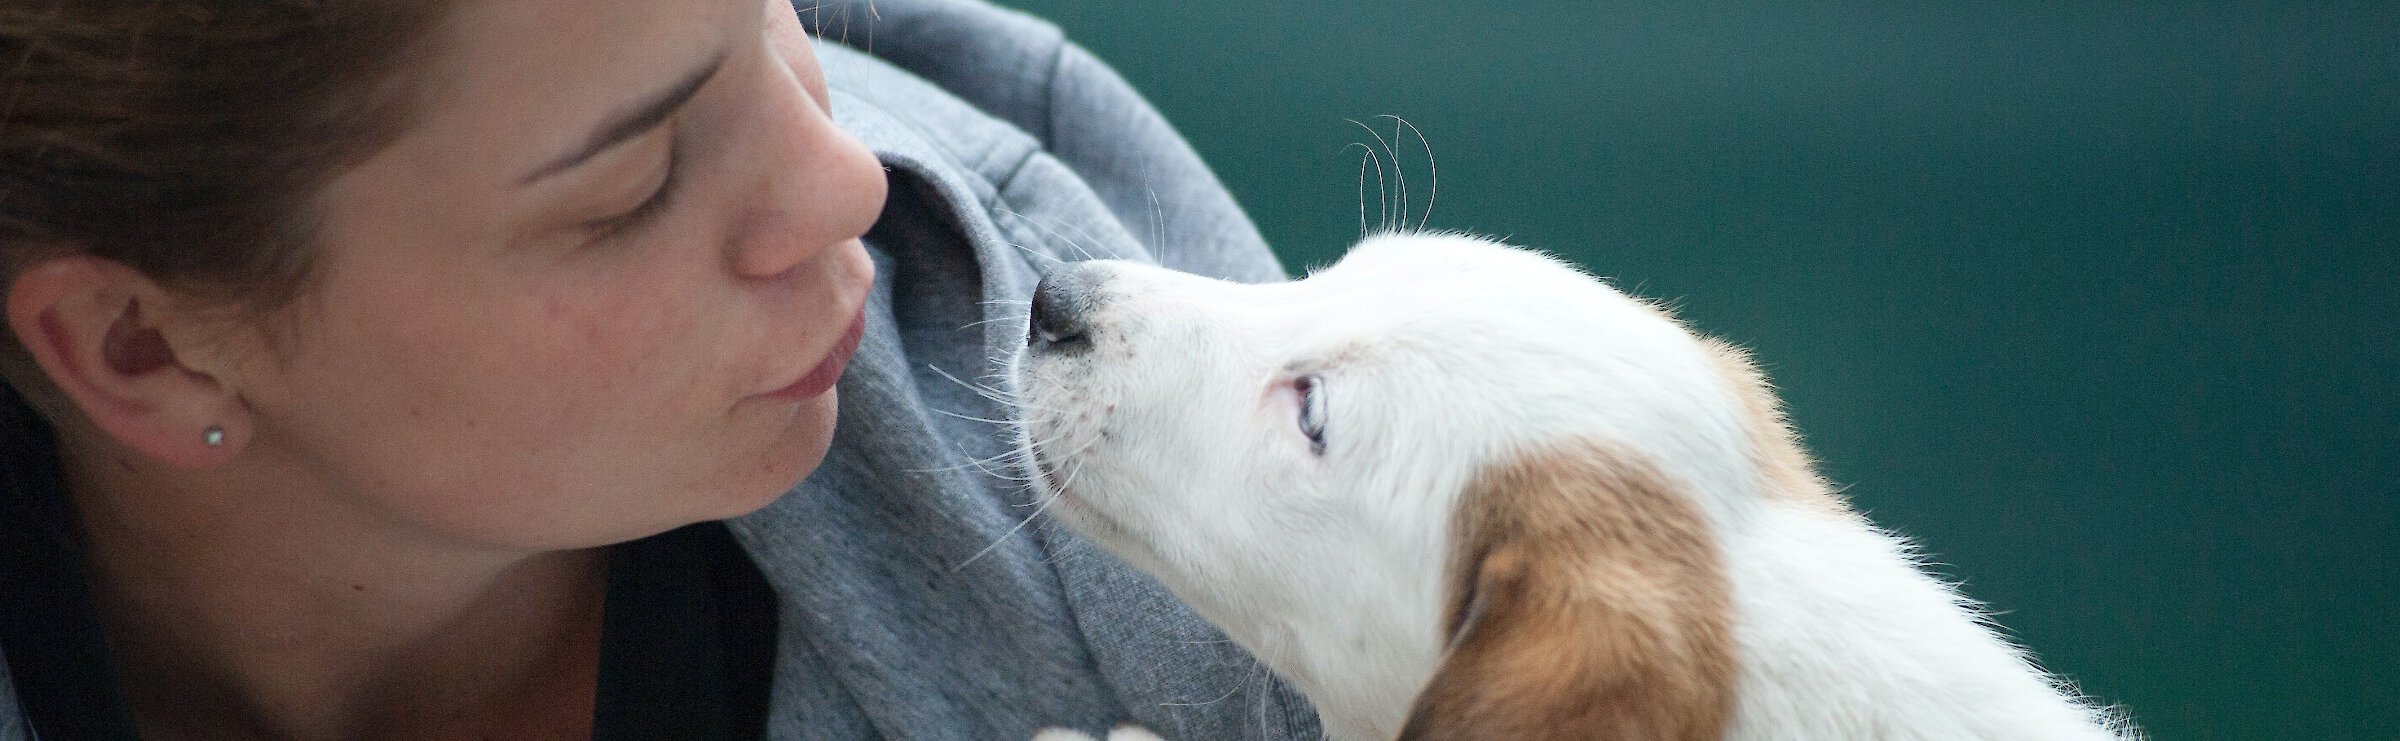 Woman looking closely at puppy